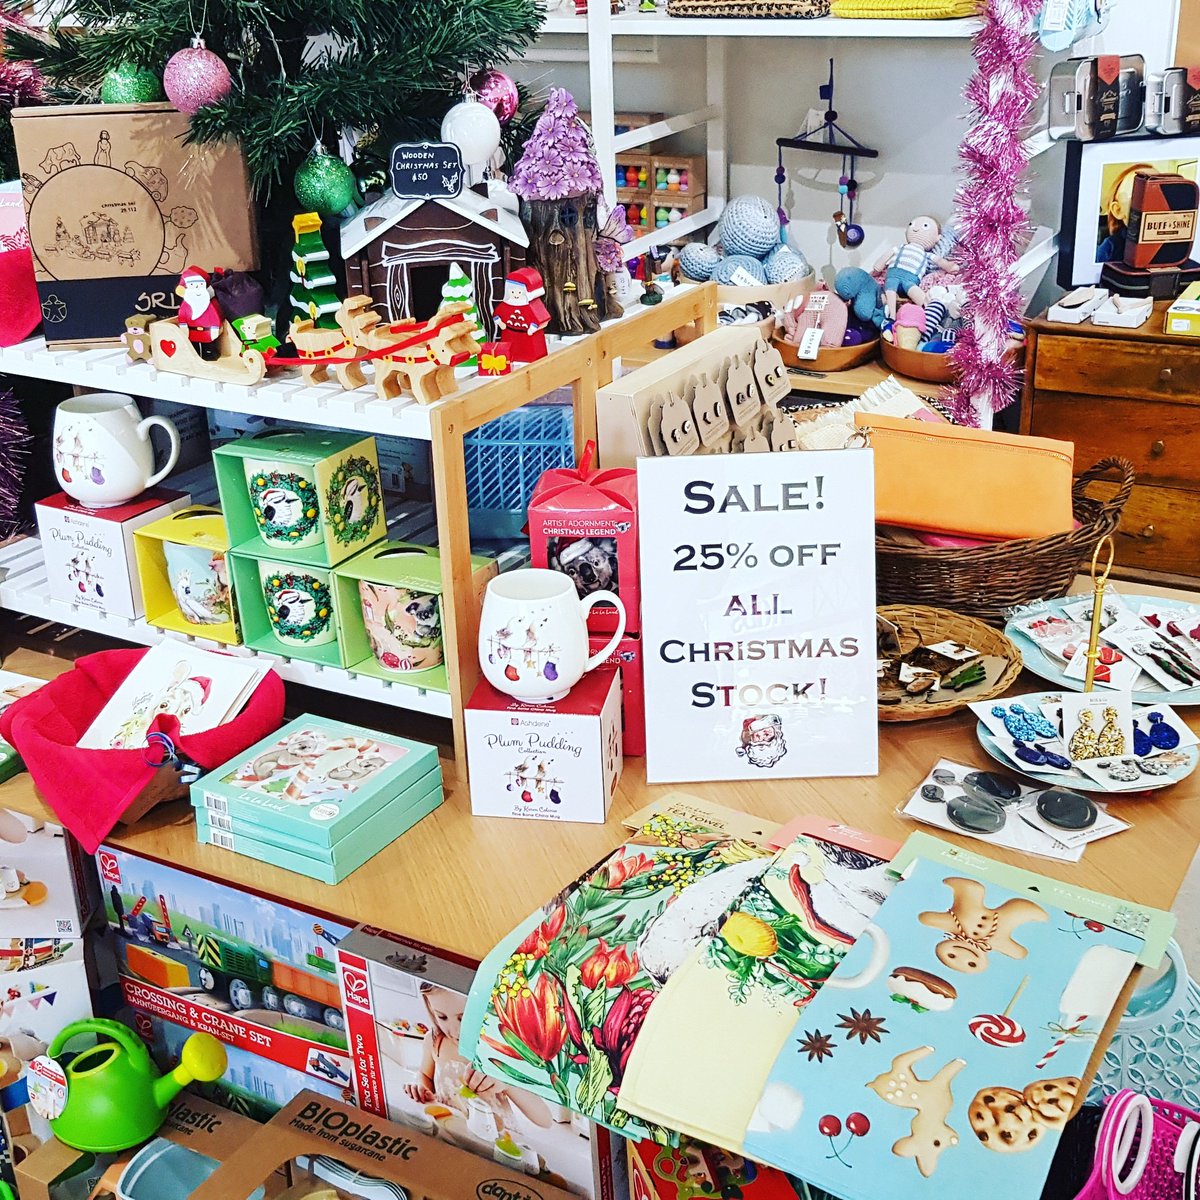 All our Christmas Stock is on Sale Till Sunday!! 25% off remaining stock! Hurry!! There are only 363 days till Chrsitmas!!#hammersandwands #giftshop #kidshop #toyshop #giftideas #lastchance #sale #teatowels #baubles #australiana #greetingcards #lalaland #moxandco #ashdene #bokbok